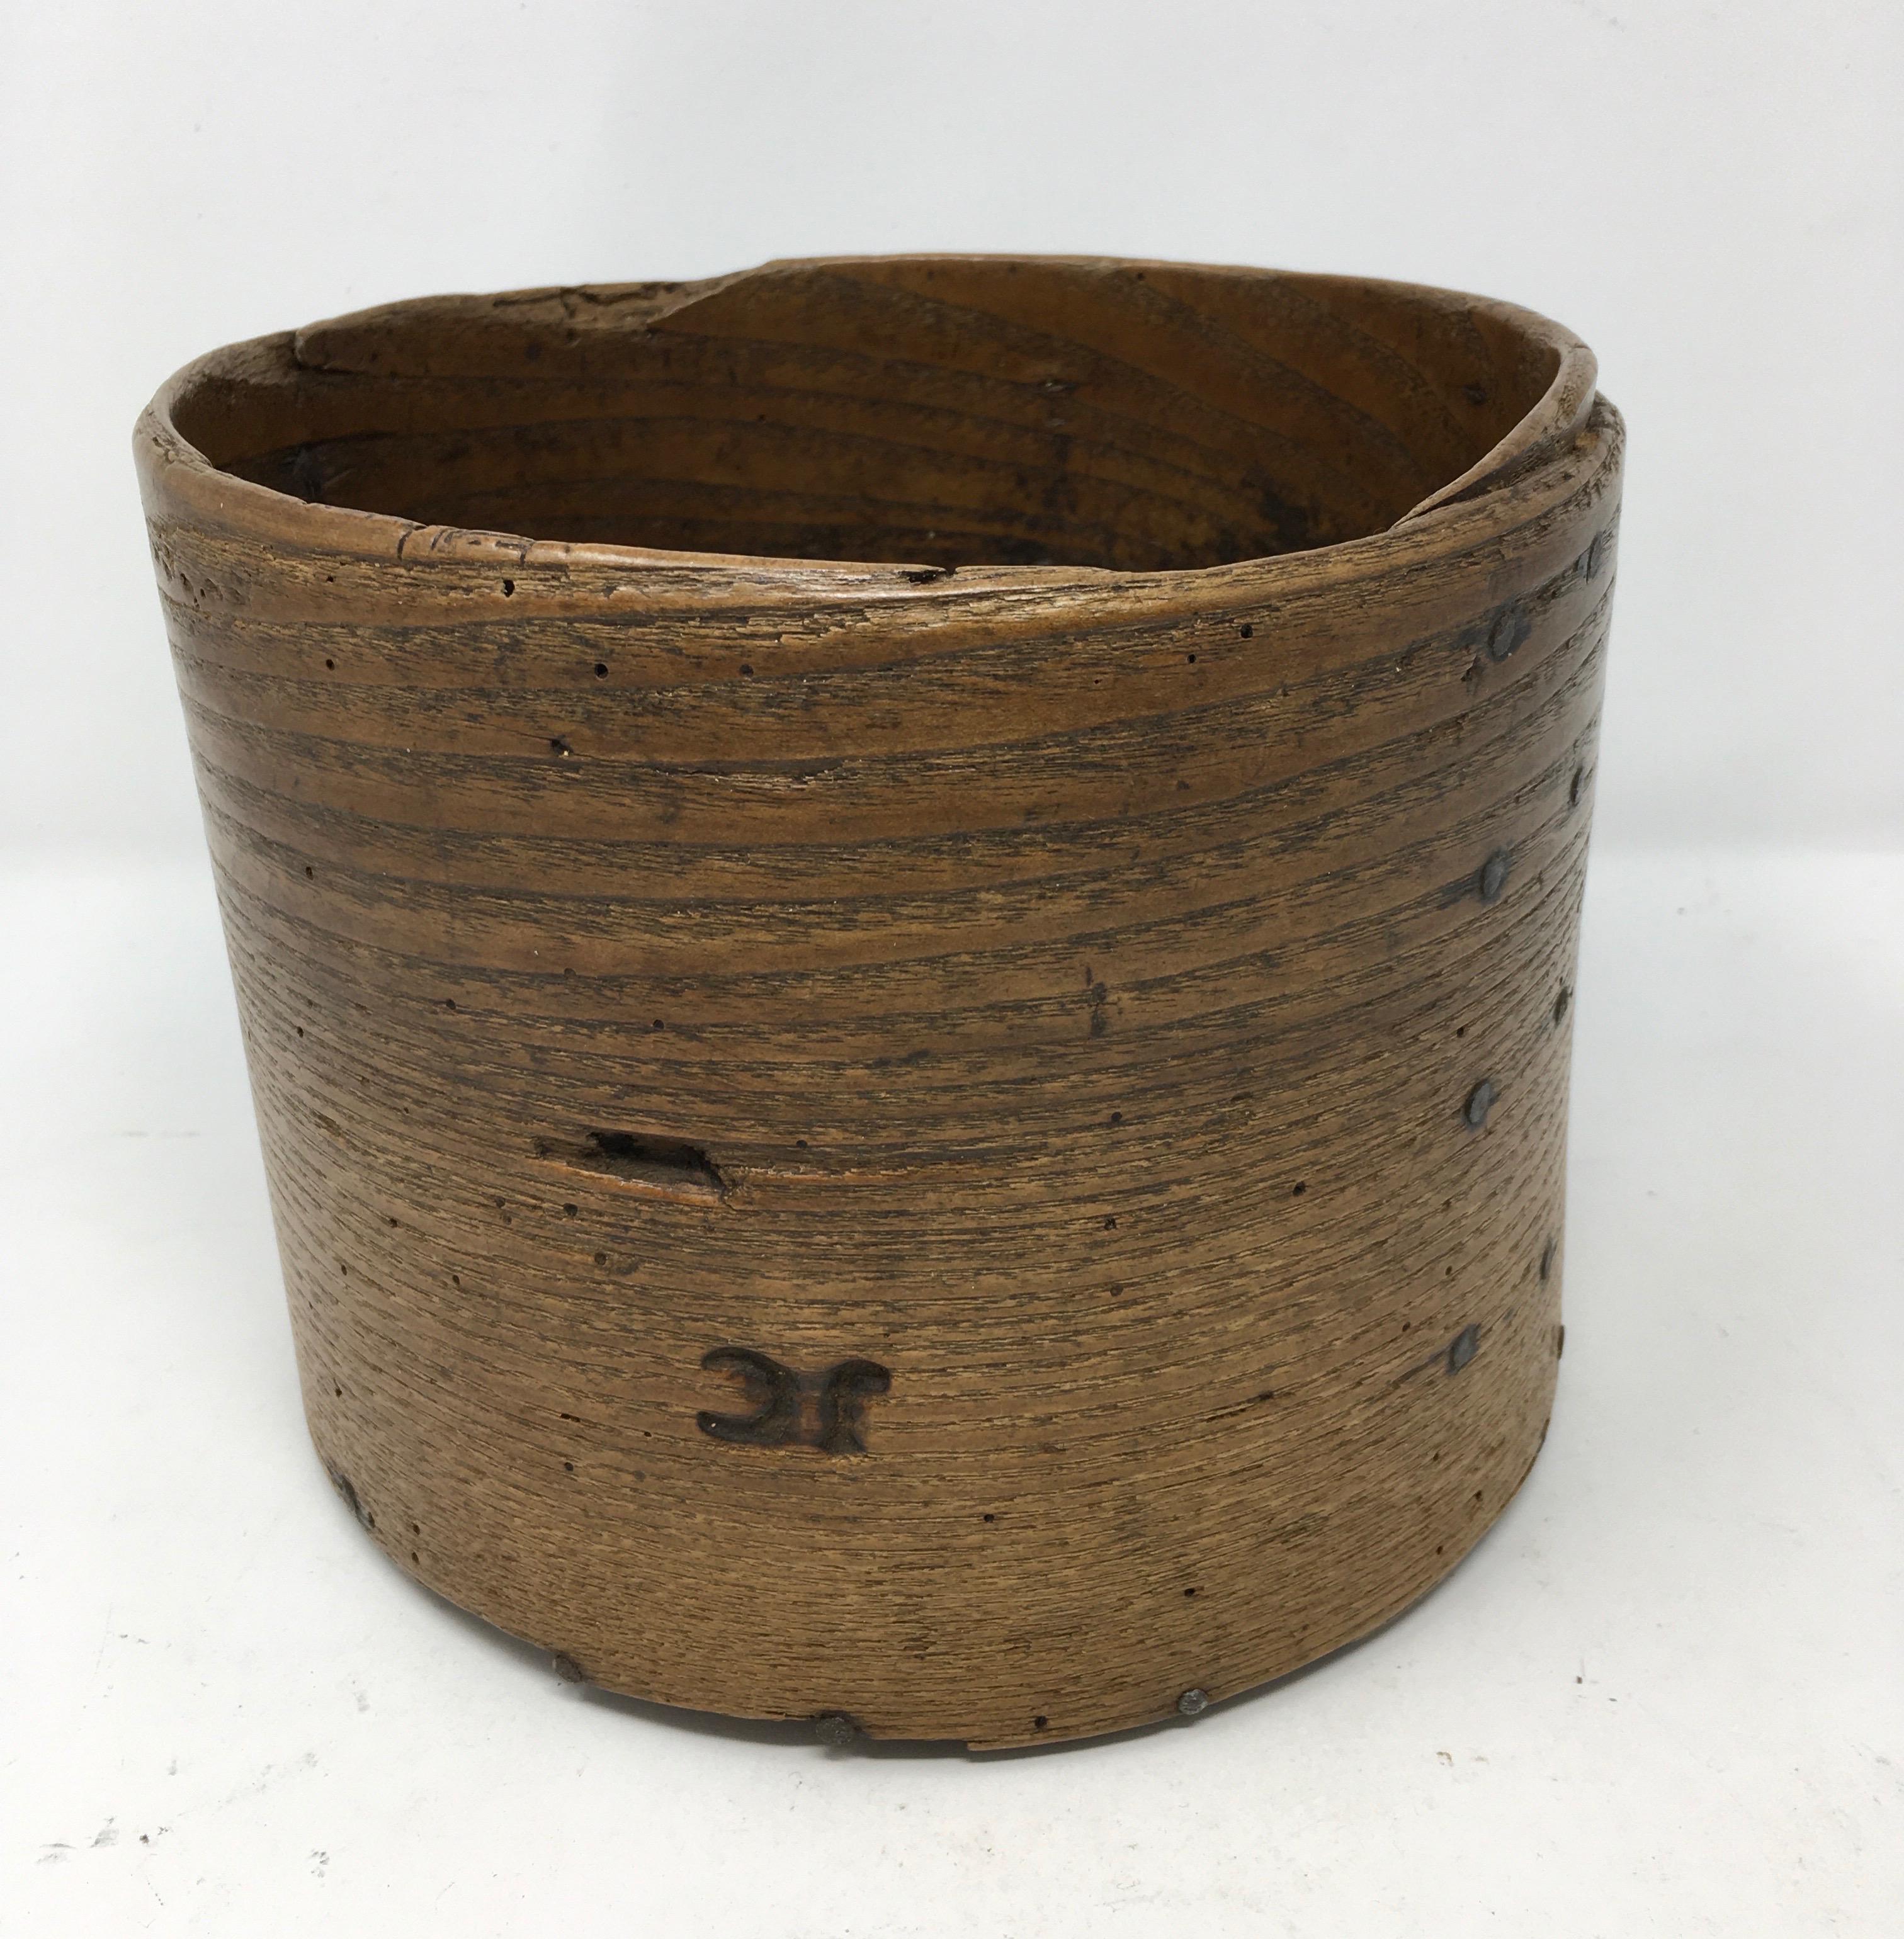 Found in England, this 19th century primitive grain measure is made with a single piece of wood bent into a barrel shape secured by tiny rivets around a round bottom piece of wood. The piece, stamped JC has fabulous aged wood patina and would be